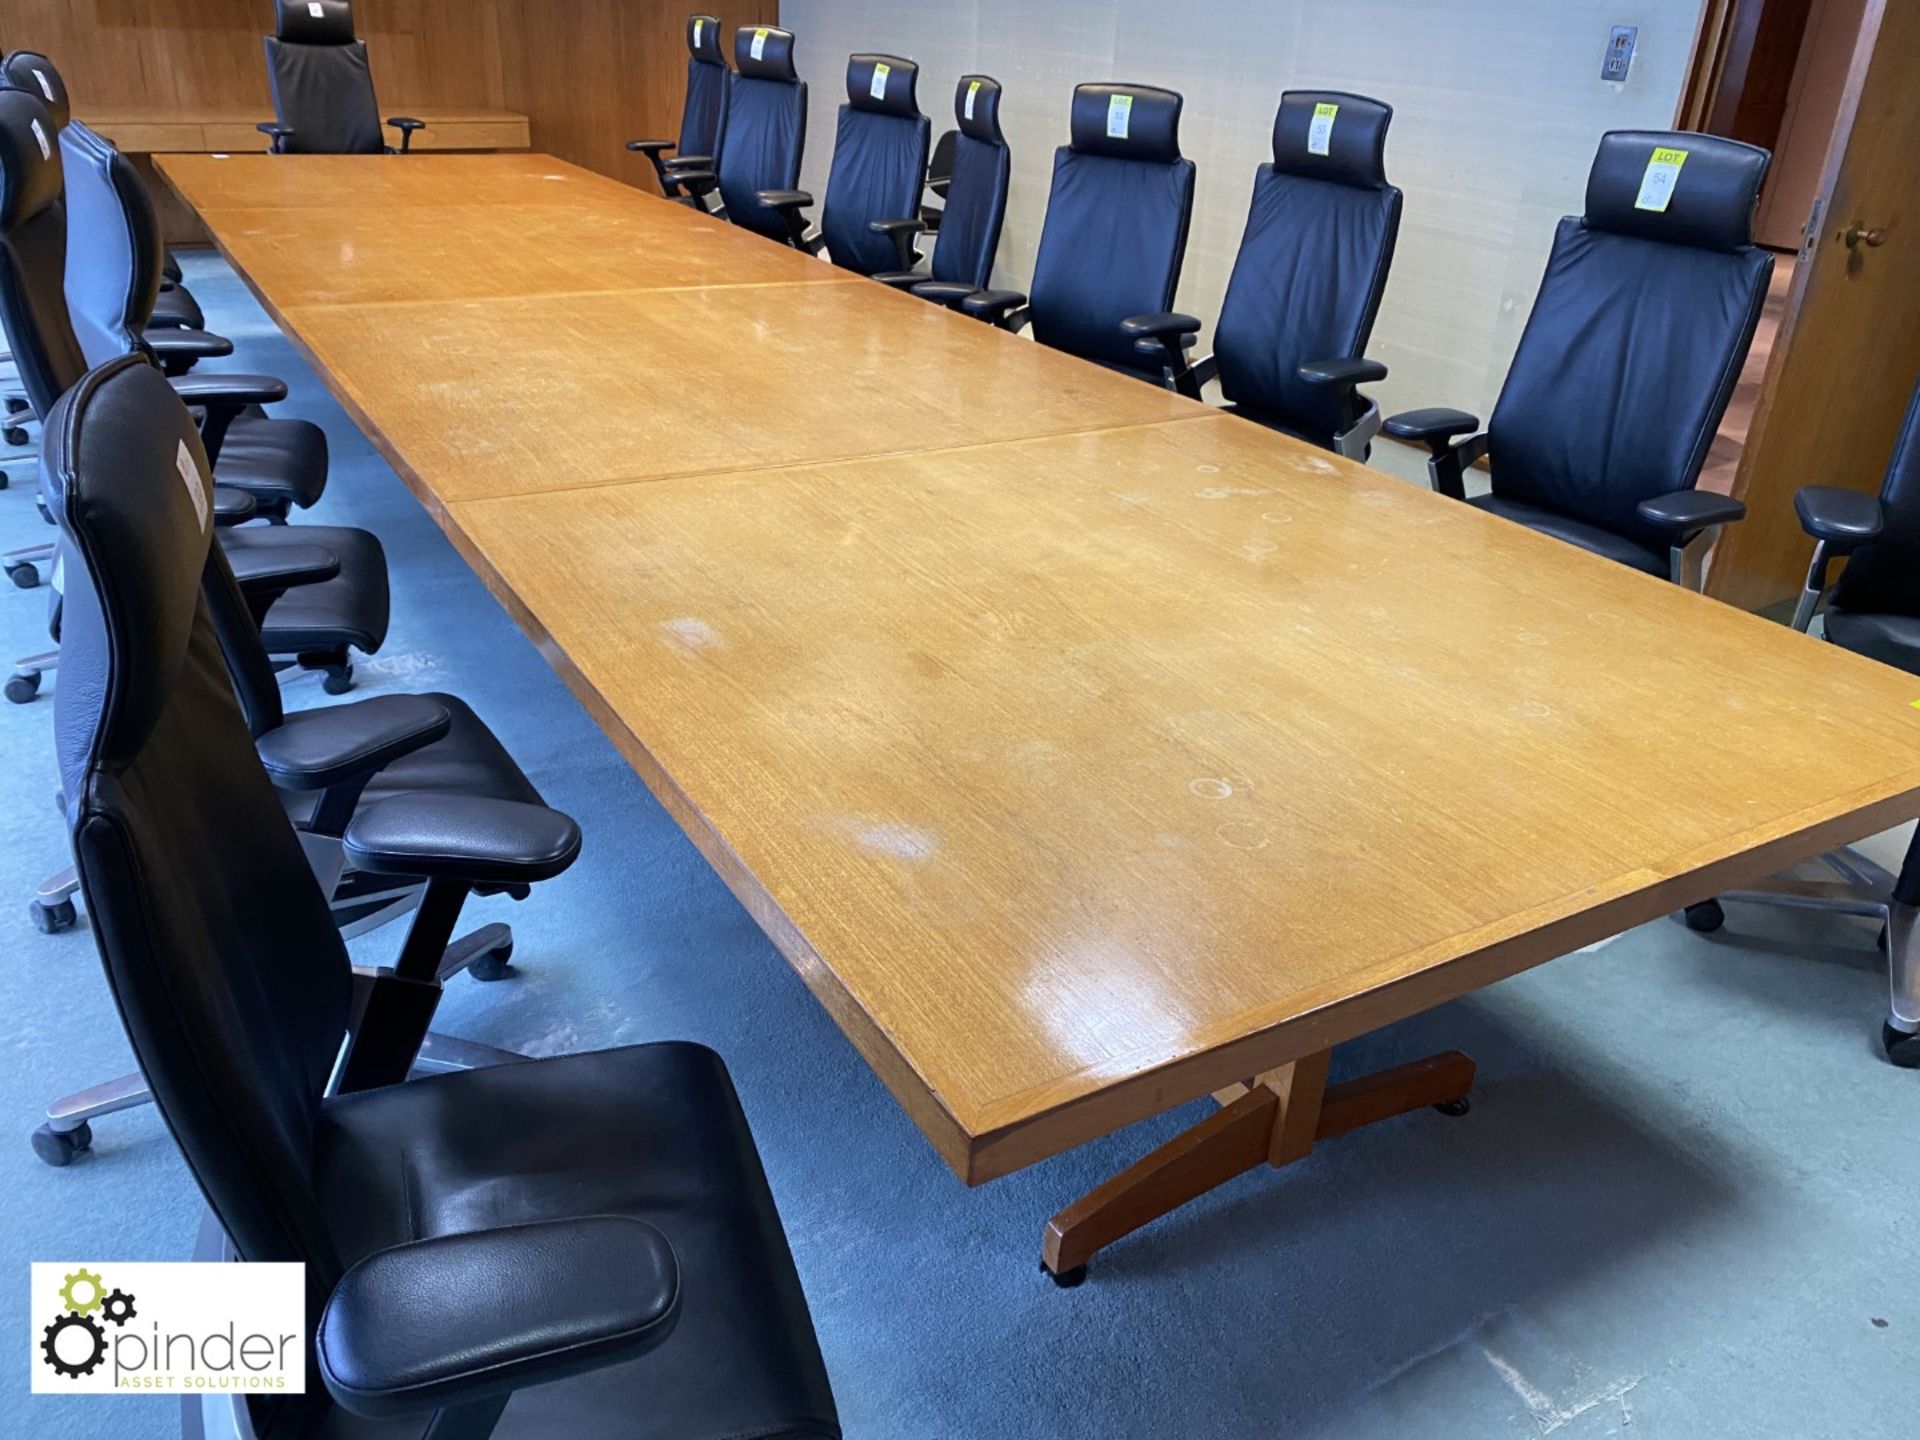 Oak 4-section Meeting Table, 6400mm x 1590mm (located in Meeting Room 13 on 23rd Floor) - Image 4 of 6